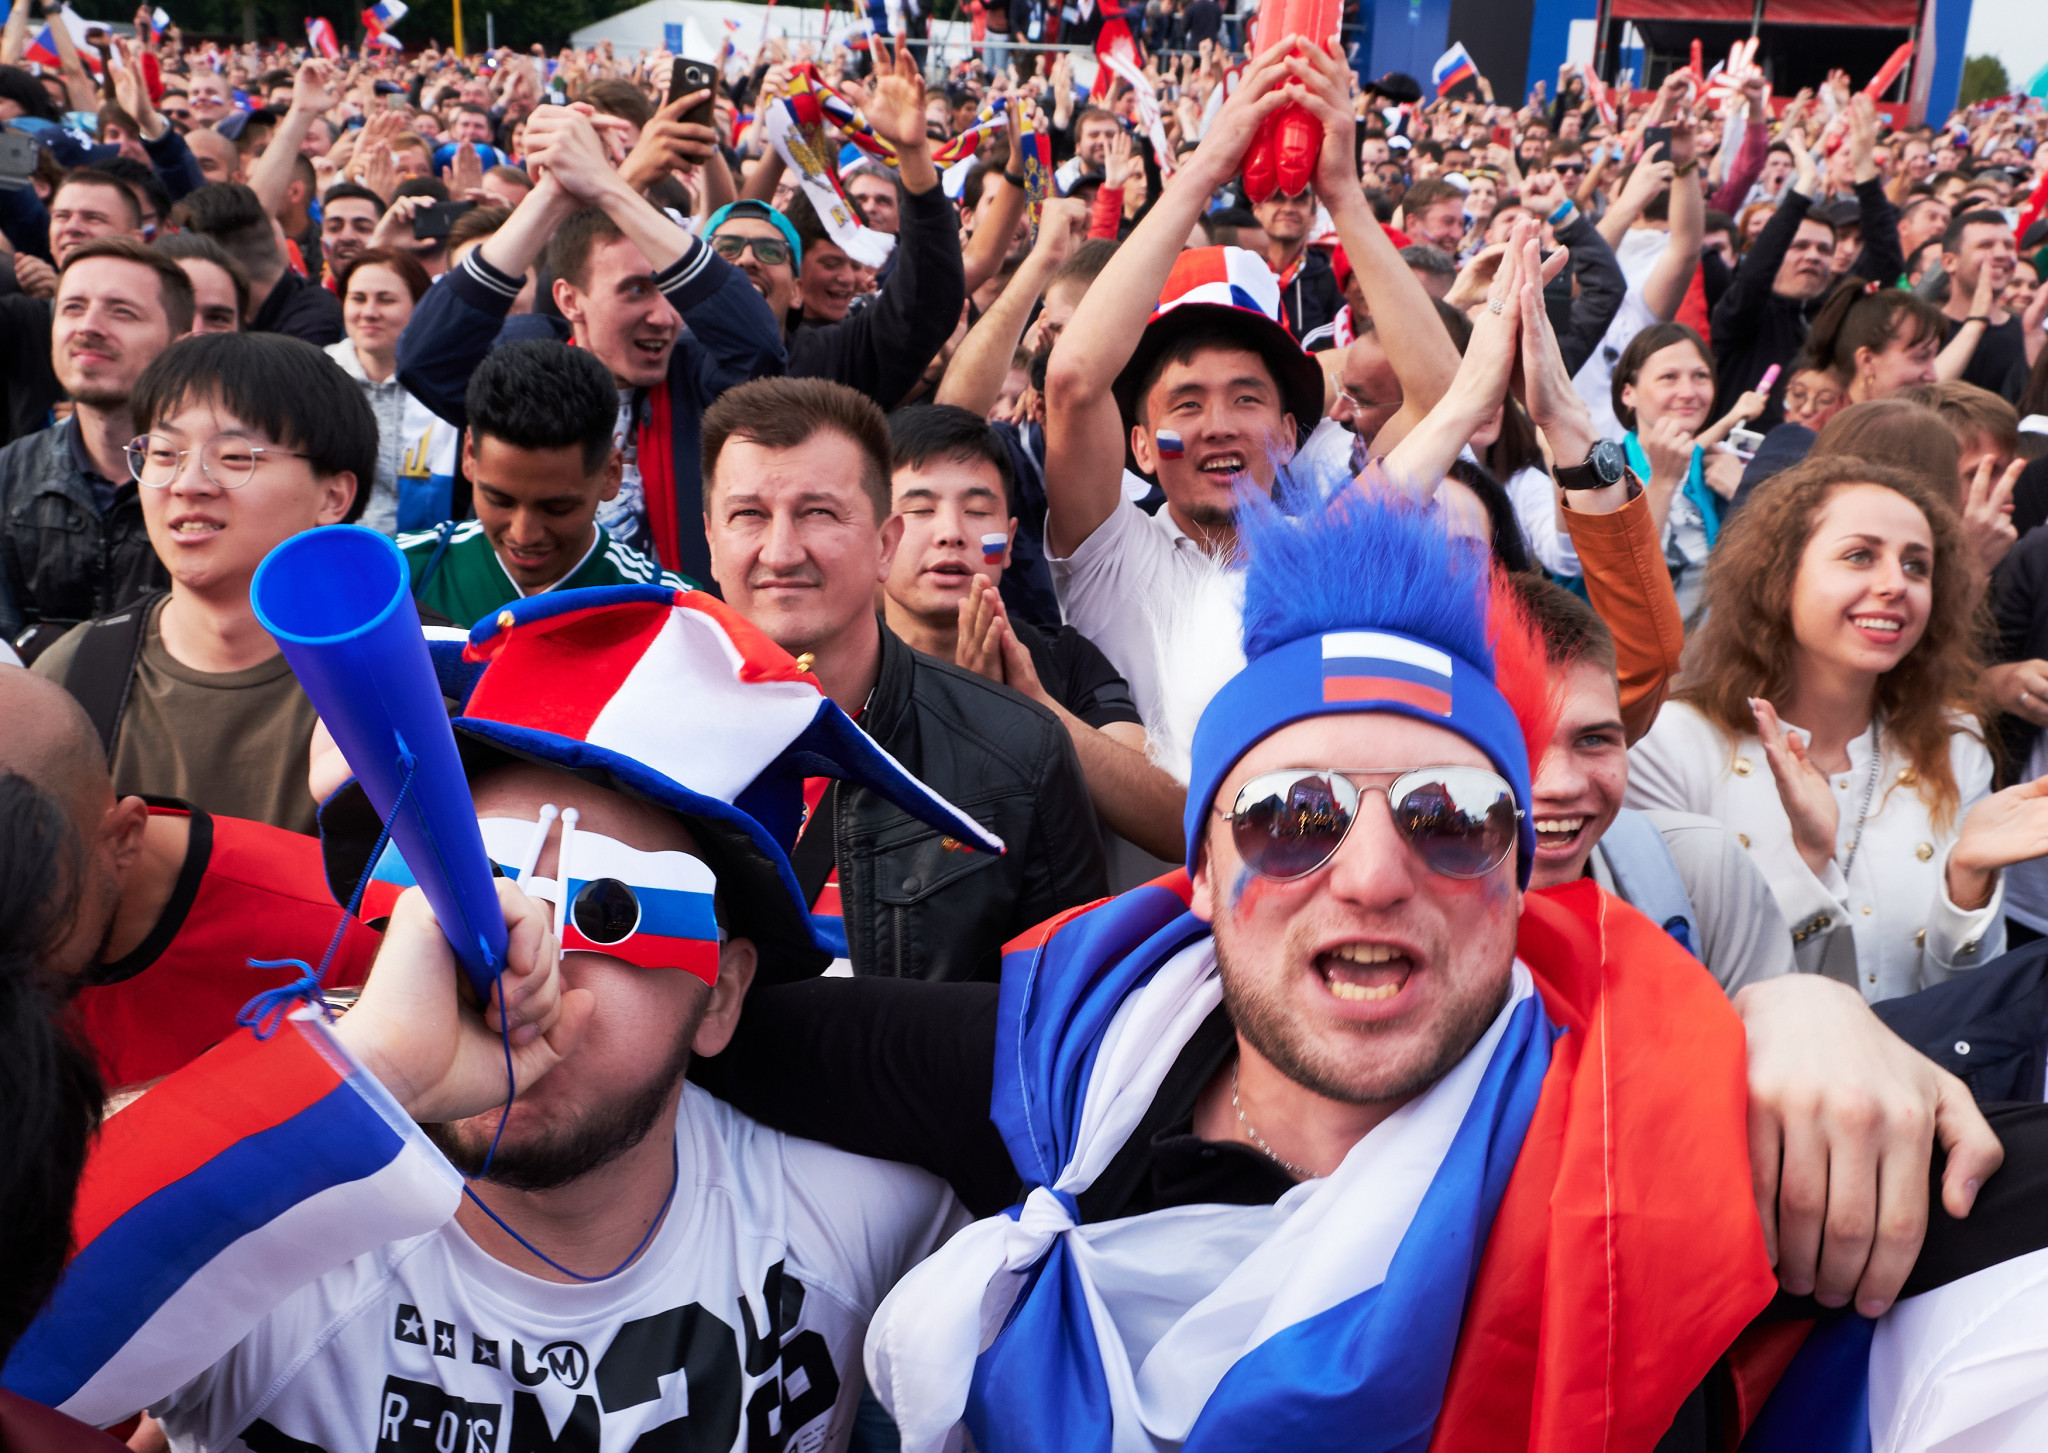 Jubilant Russian fans celebrate the victory in Moscow ©Getty Images